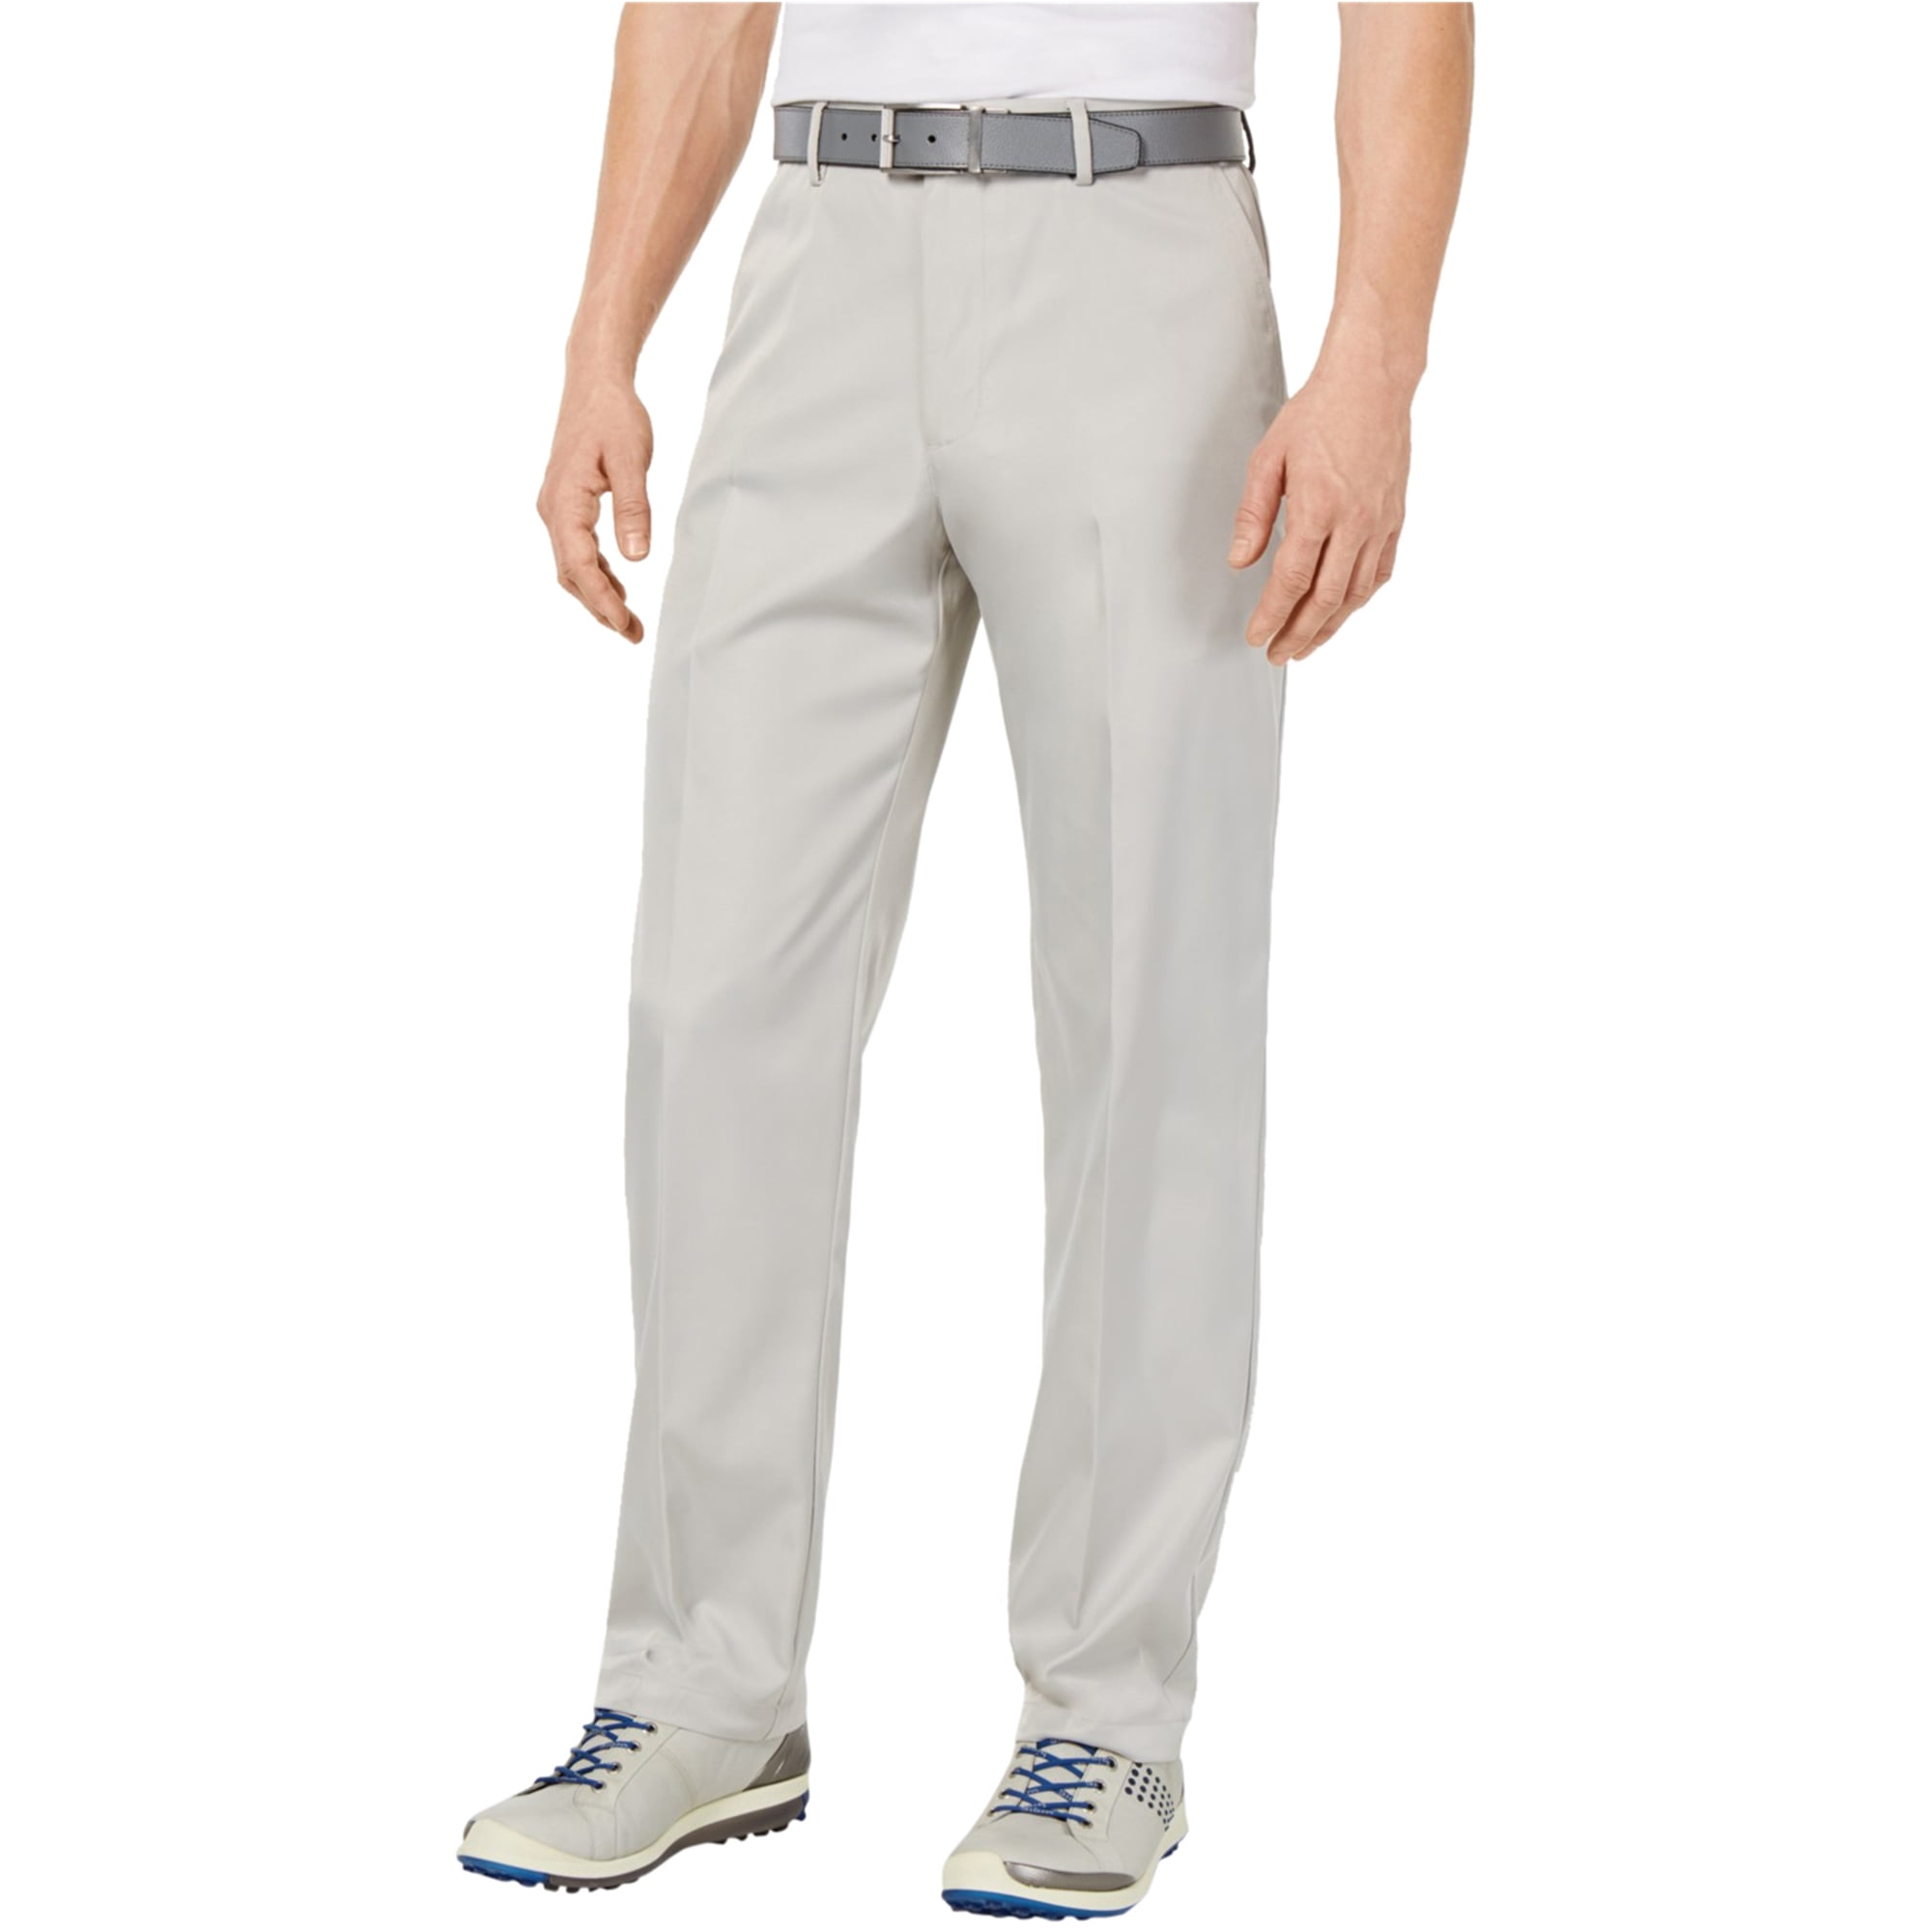 Greg Norman Mens Solid Flat Front Casual Trouser Pants, Grey, 36W x 32L ...